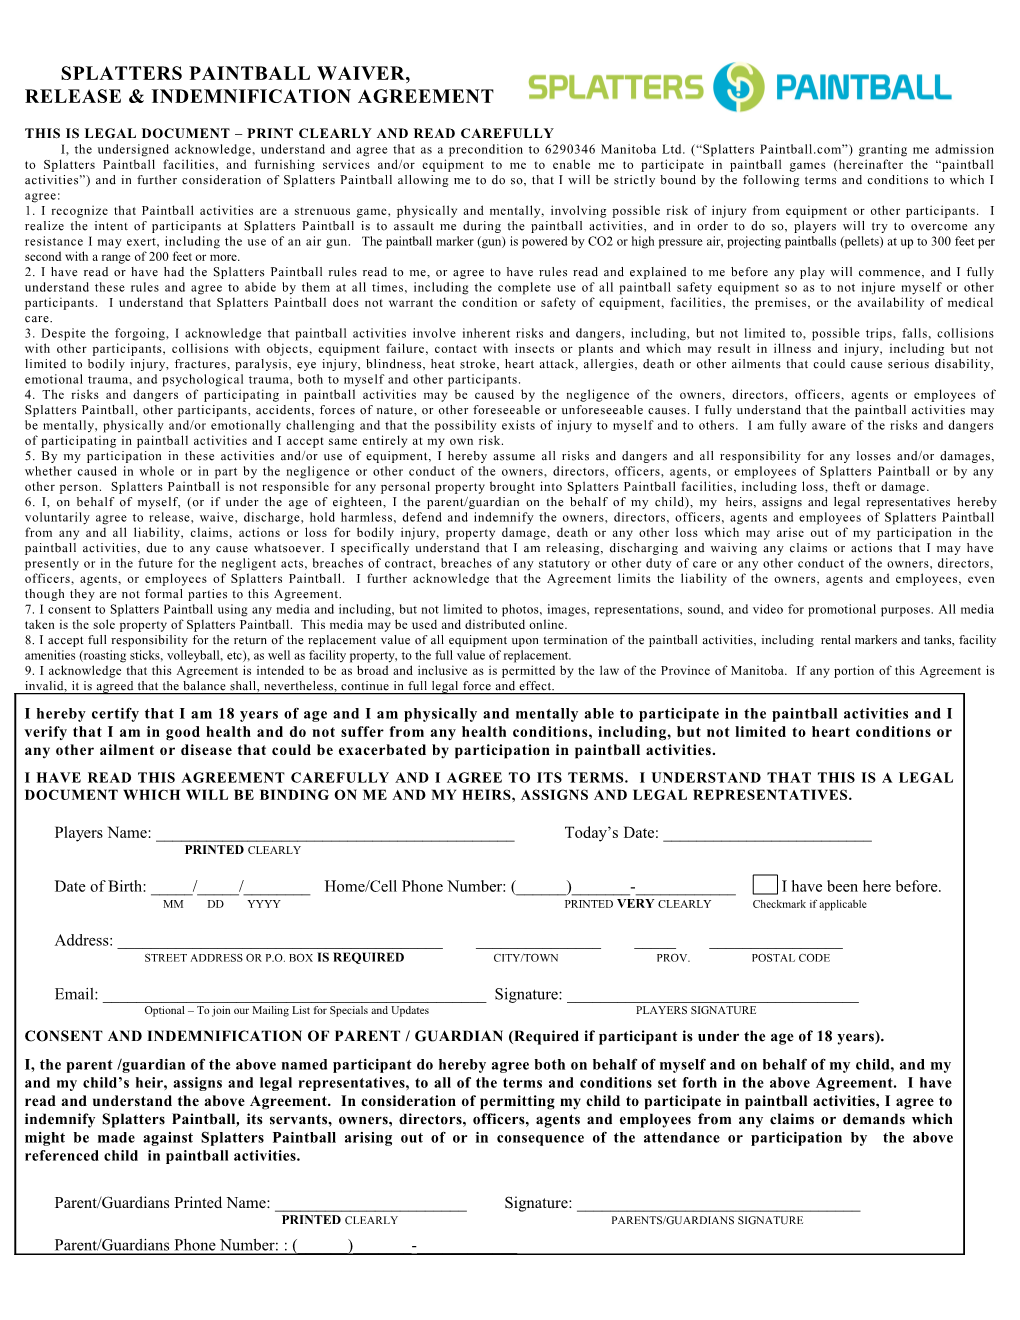 Athlete's Waiver, Release & Indemnification